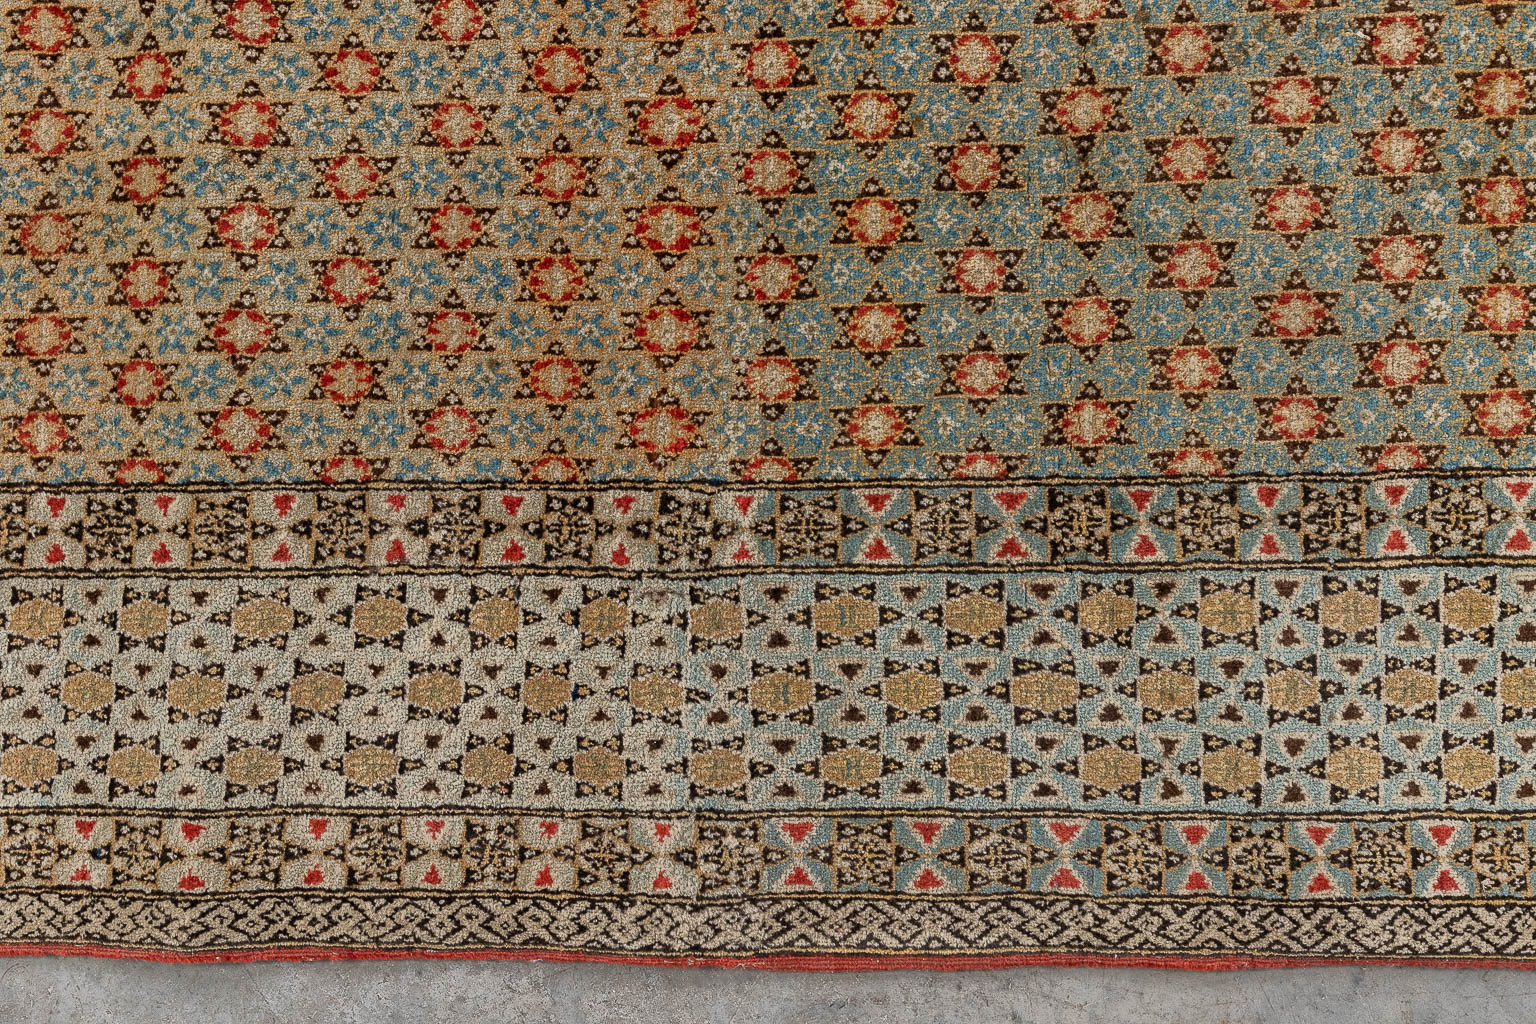 A collection of 2 Oriental hand-made carpets. Persia. (L: 220 x W: 134 cm)